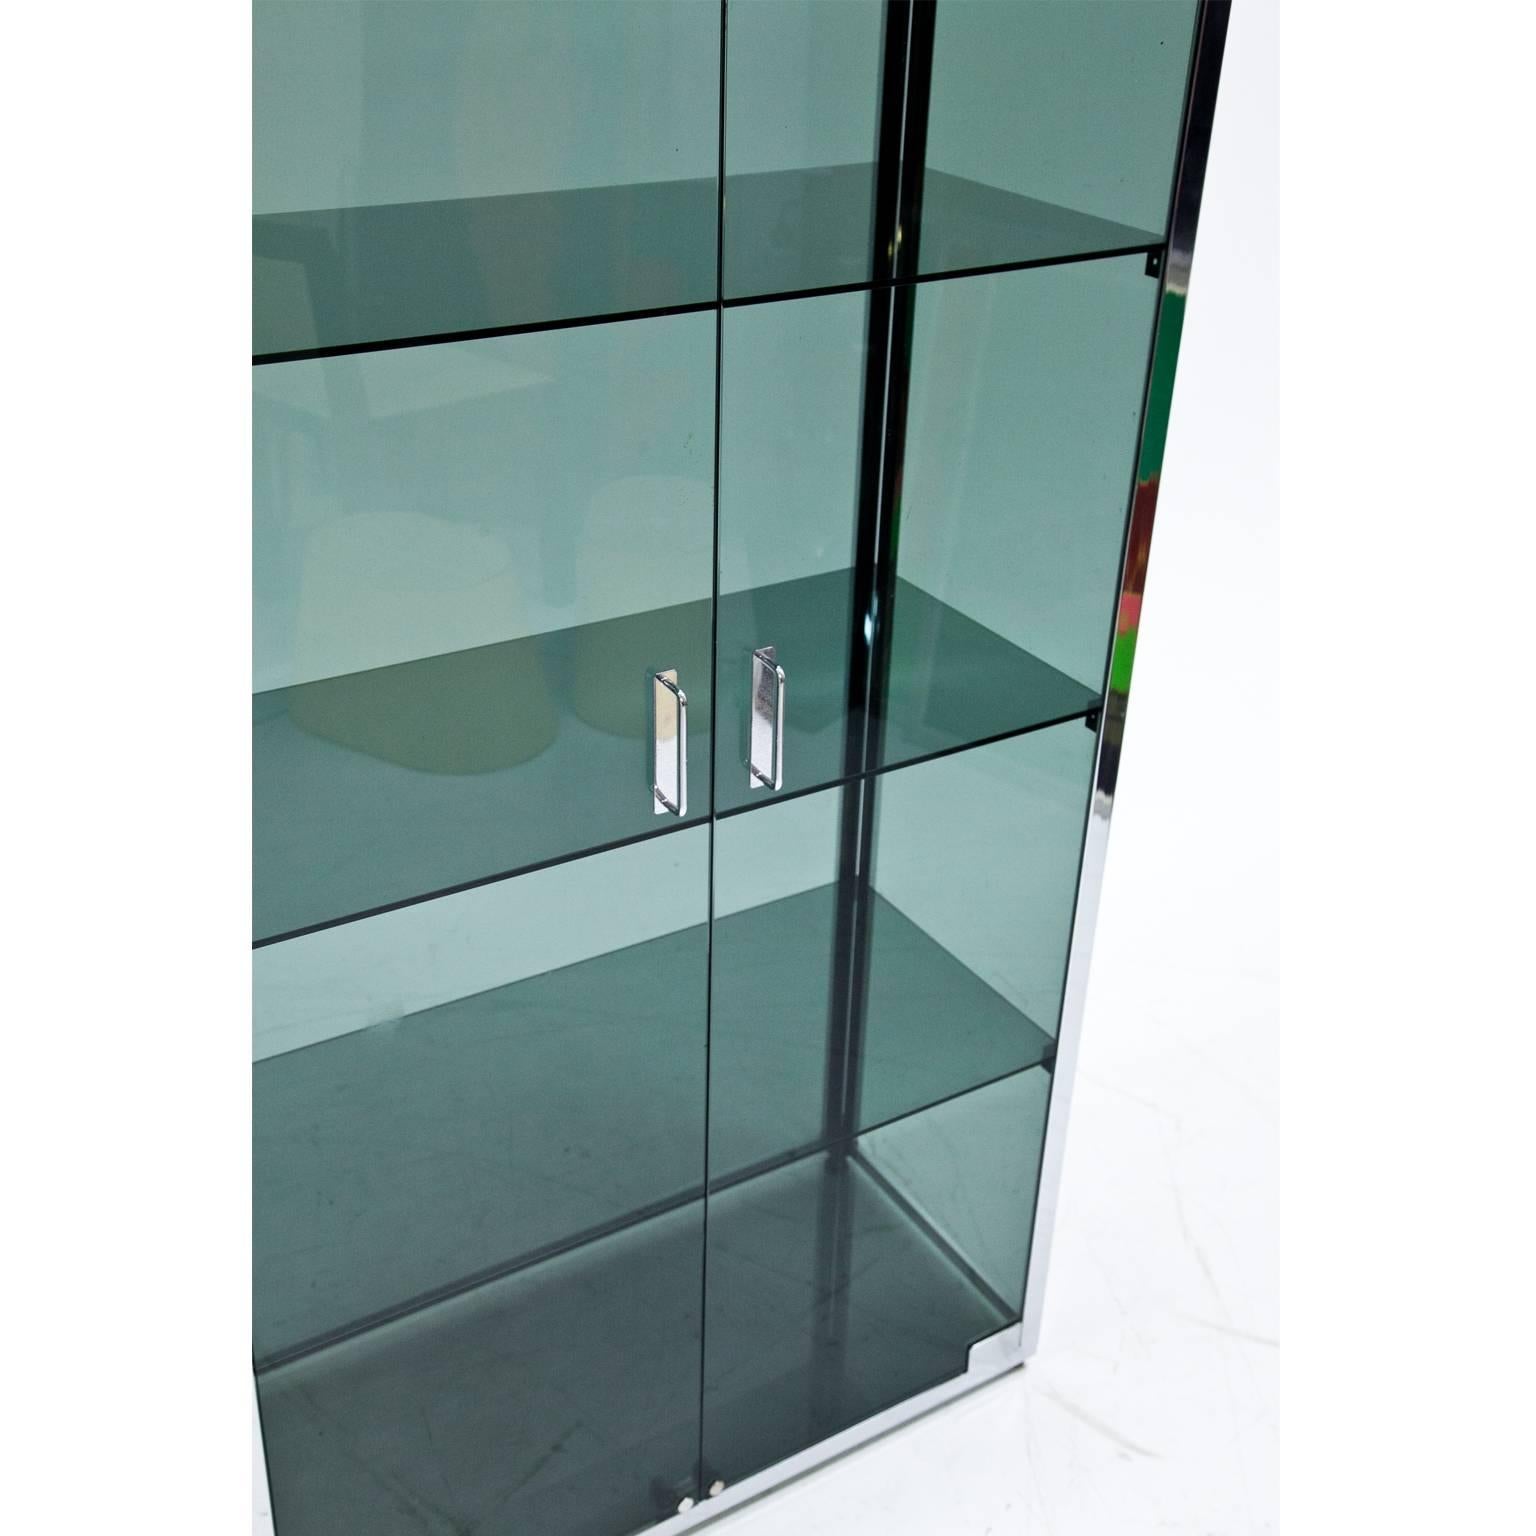 Two-doored display case with an all-round glazing and chromed framing. The glass panes are slightly tinted green.